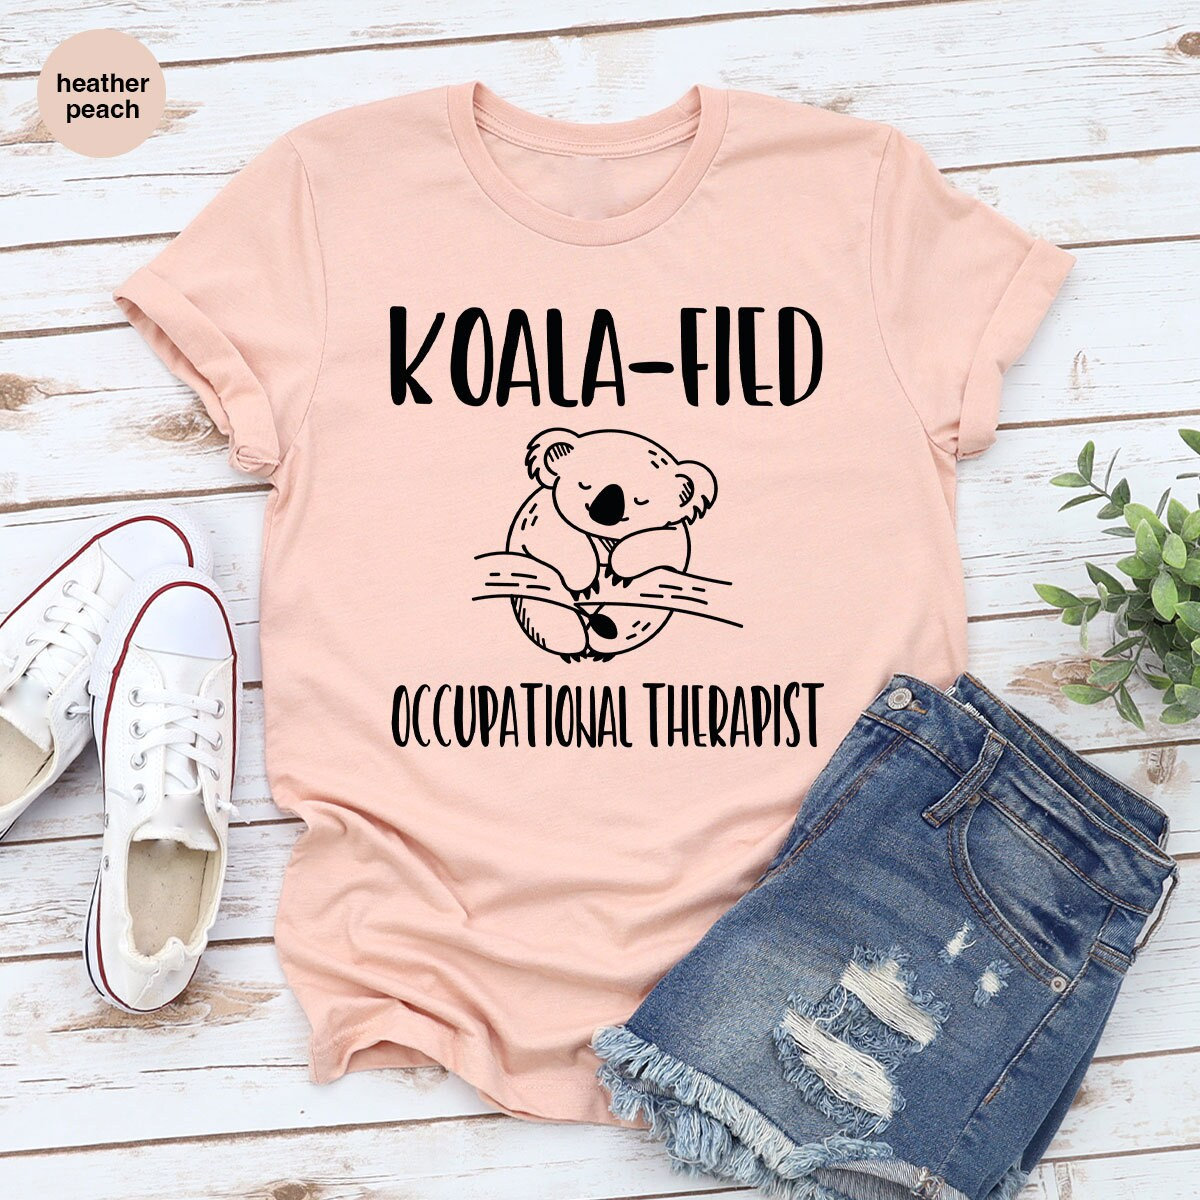 Discover Funny Occupational Therapy Shirt, Therapist Outift, Motivational Shirt, Therapy Sweatshirt, Occupational Therapist Shirt, Gift for Therapist